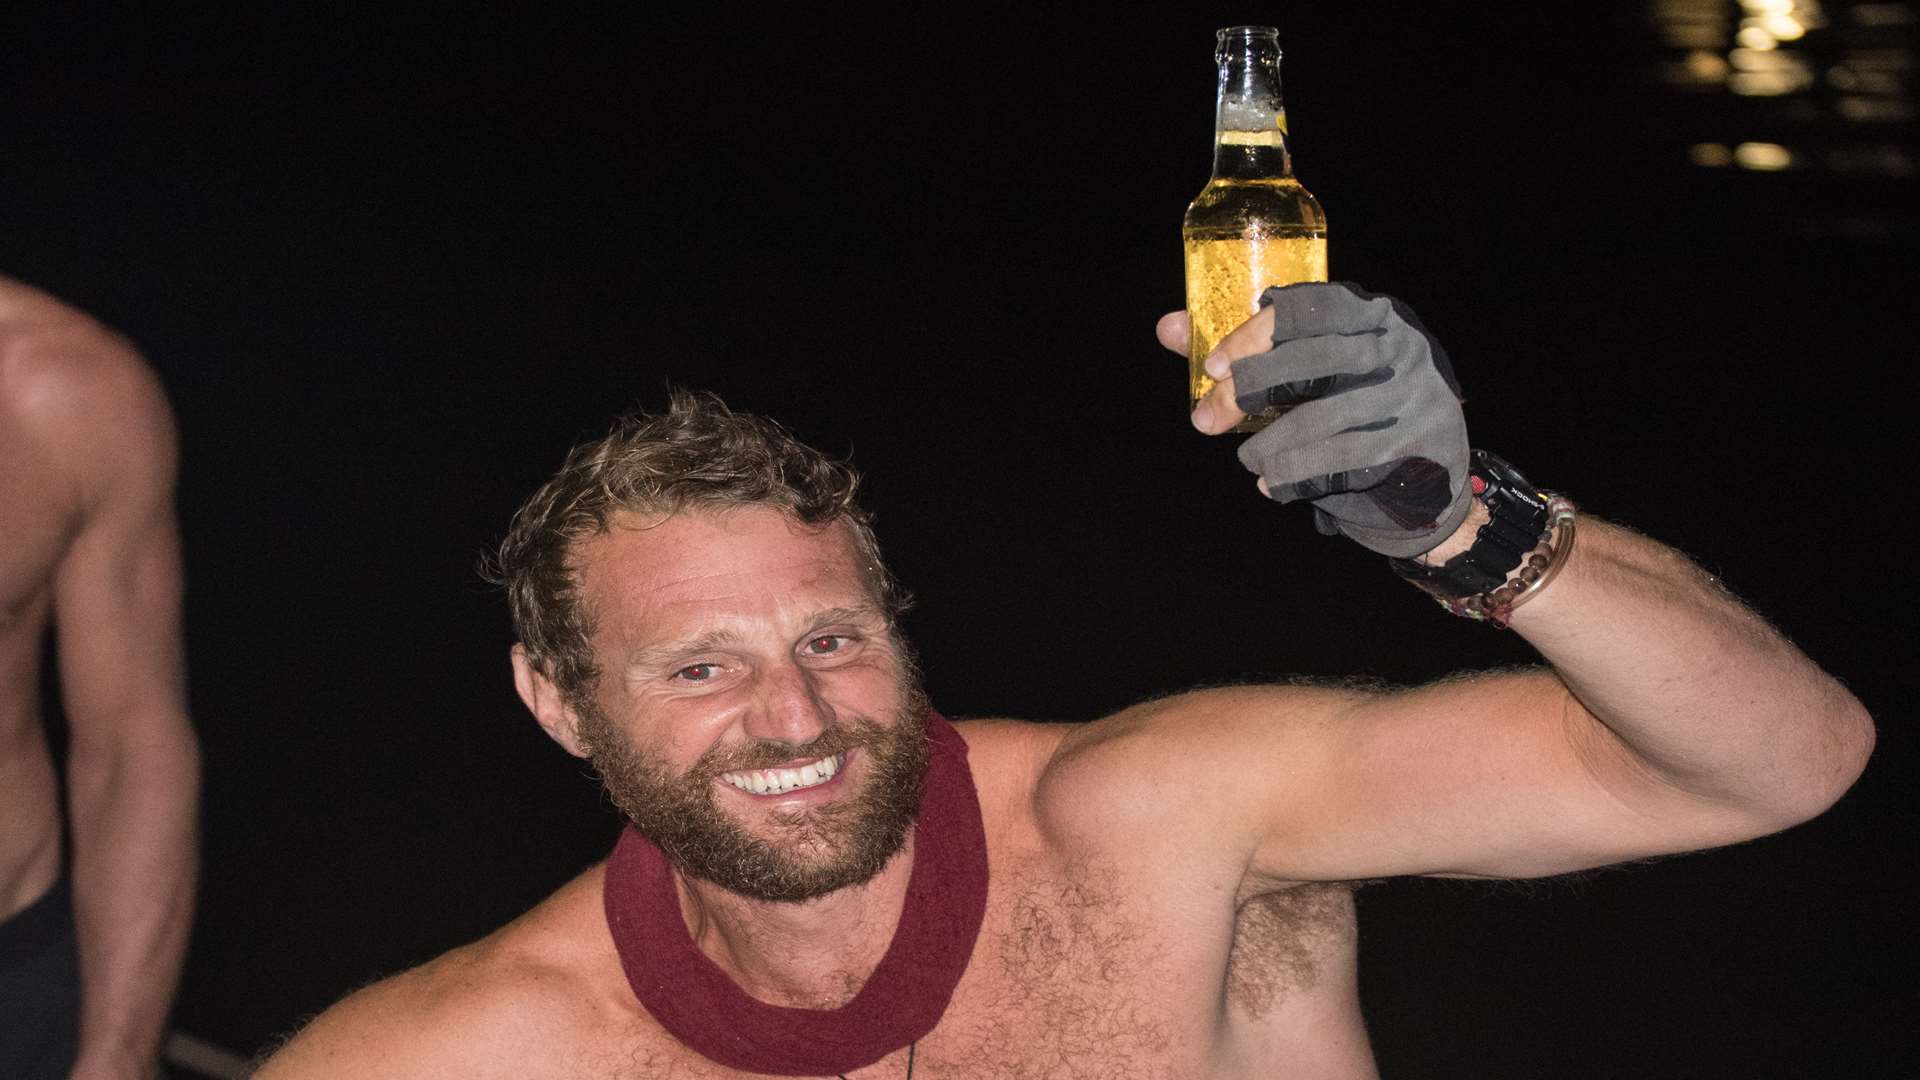 Mathew celebrating on boat Ellida after arriving in Trindad from Venezuela and breaking the record